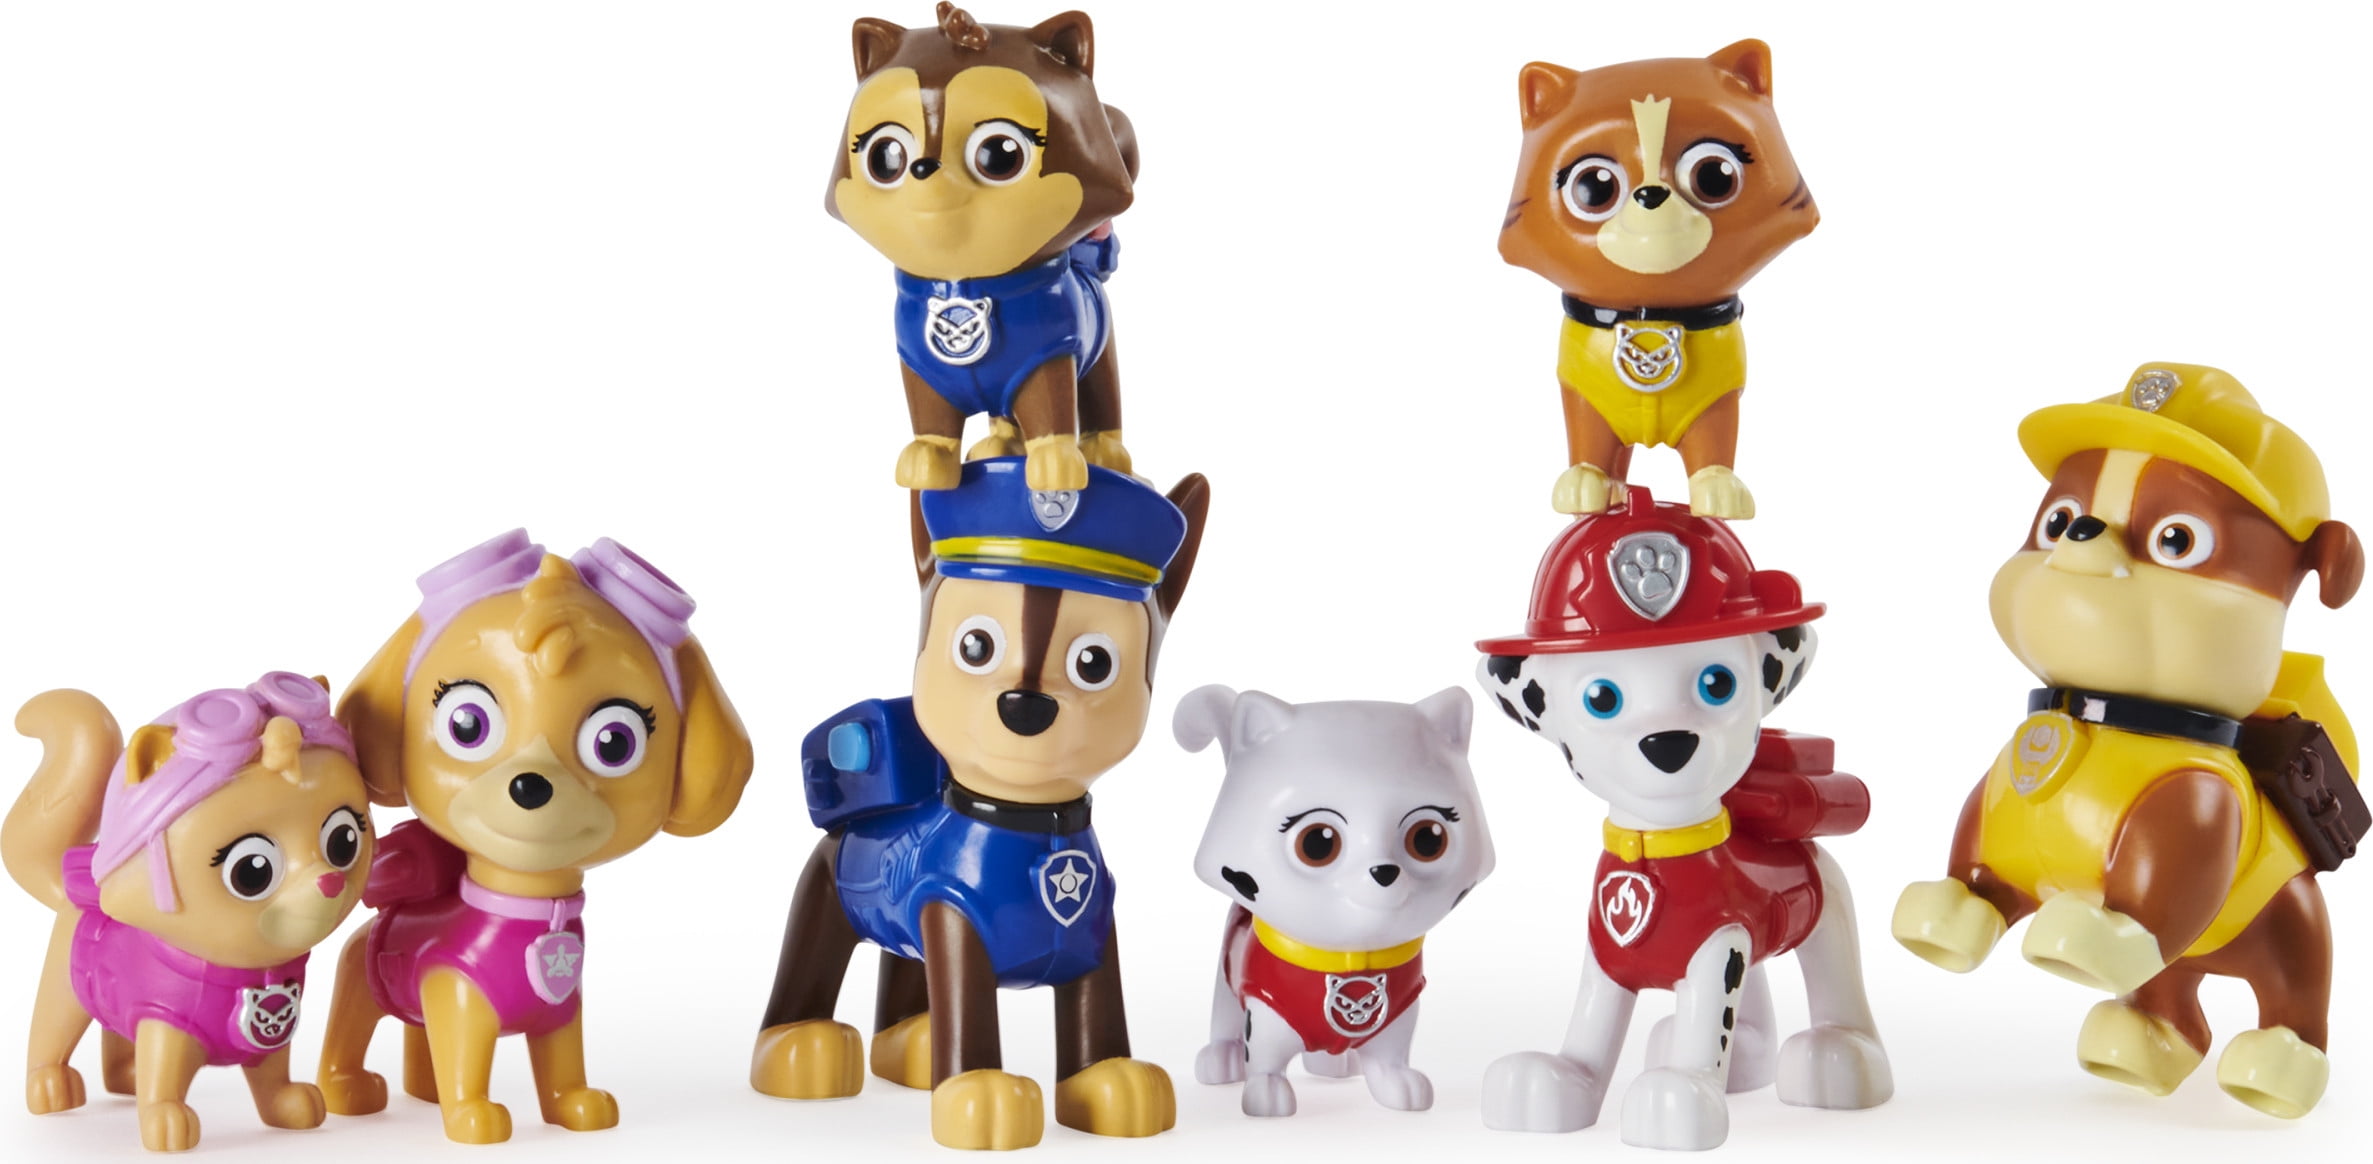 Paw Patrol, Kitty Catastrophe Gift Set with Collectible Toy Figures, for Aged 3 and - Walmart.com